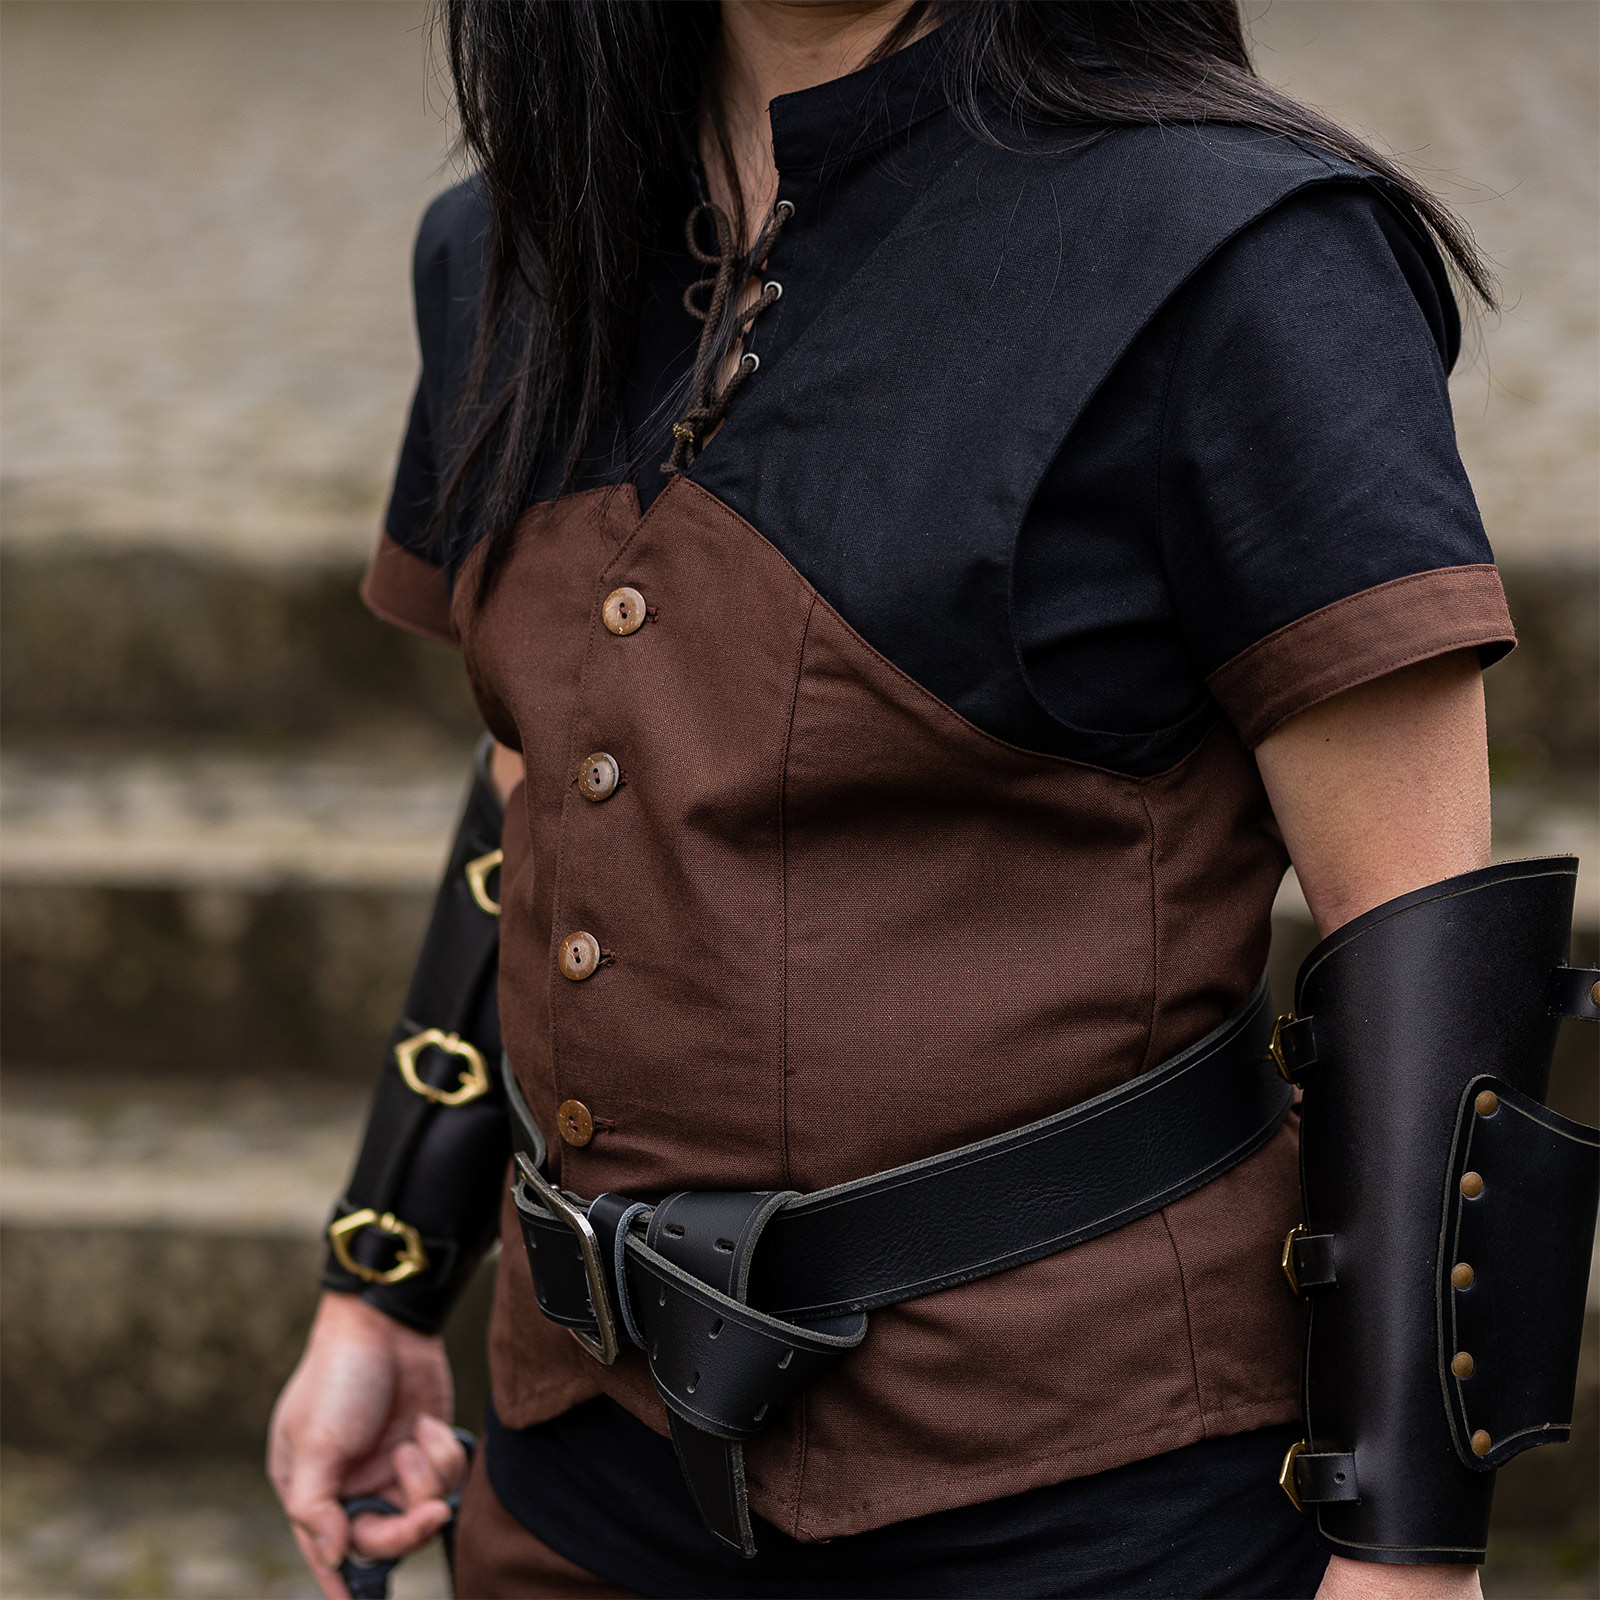 Dungeons & Dragons - Rogue Capuchonvest Bruin